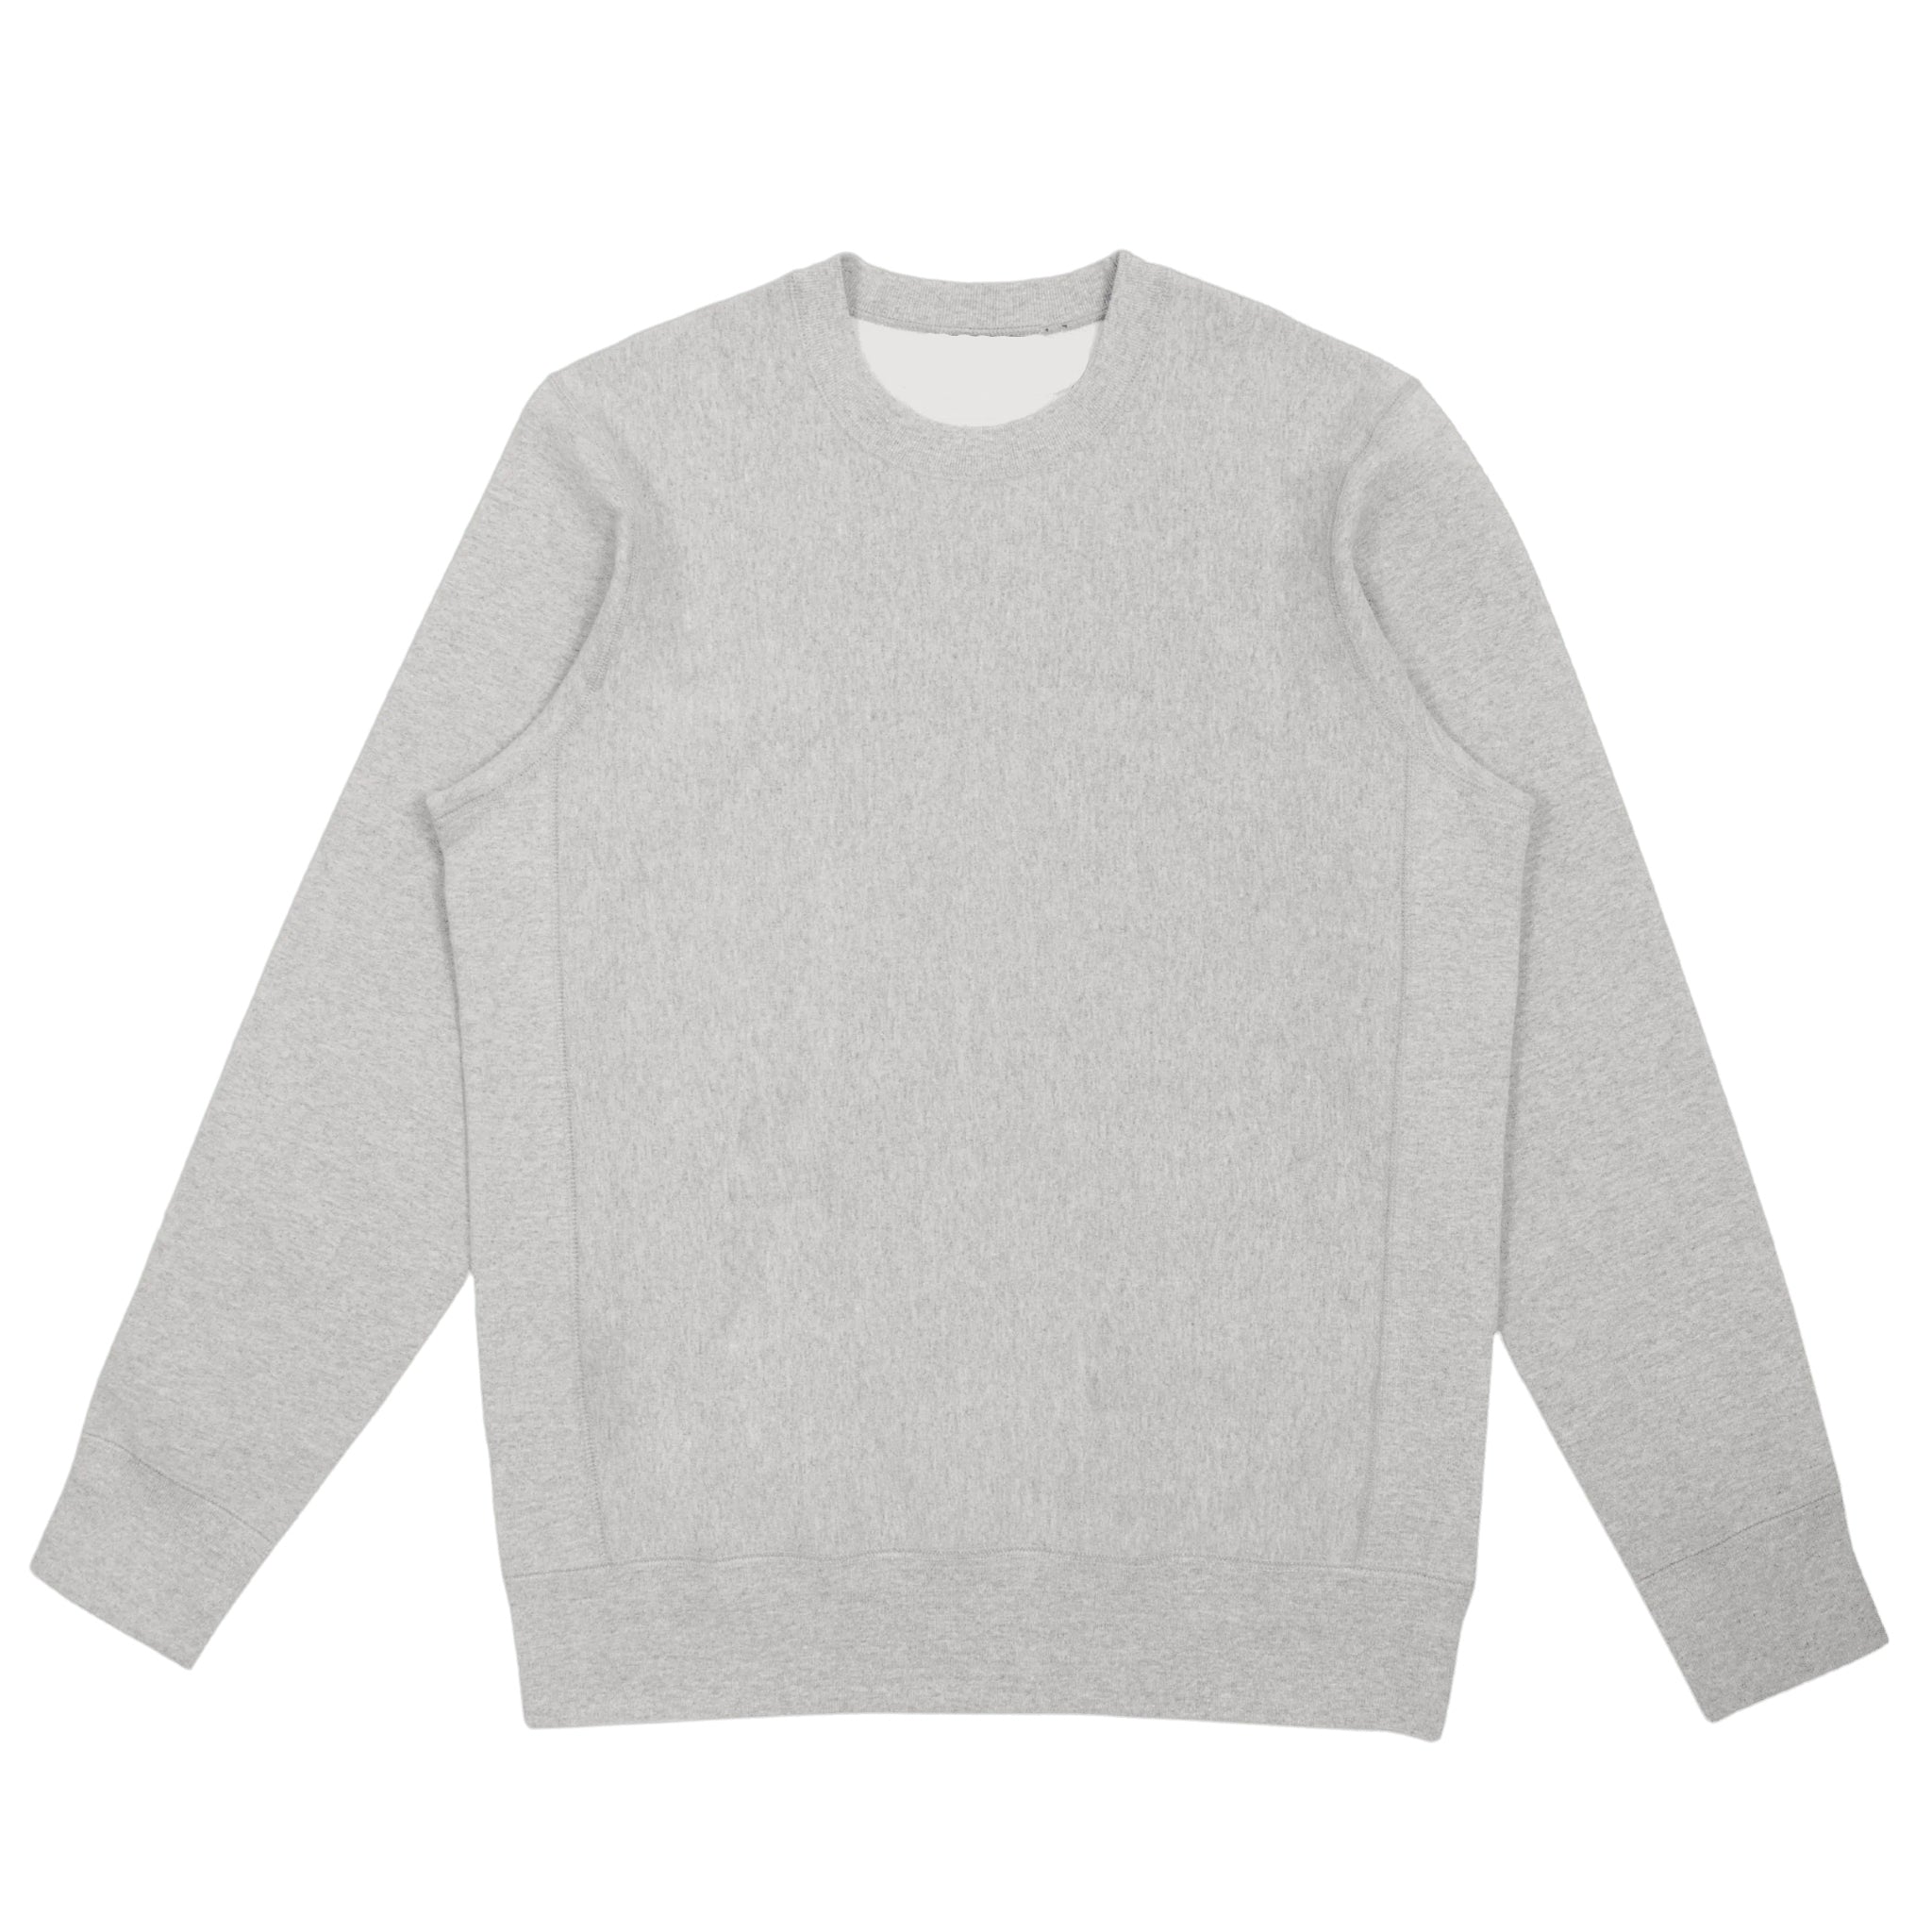 Front view of grey heavyweight knit crewneck in 100% cotton